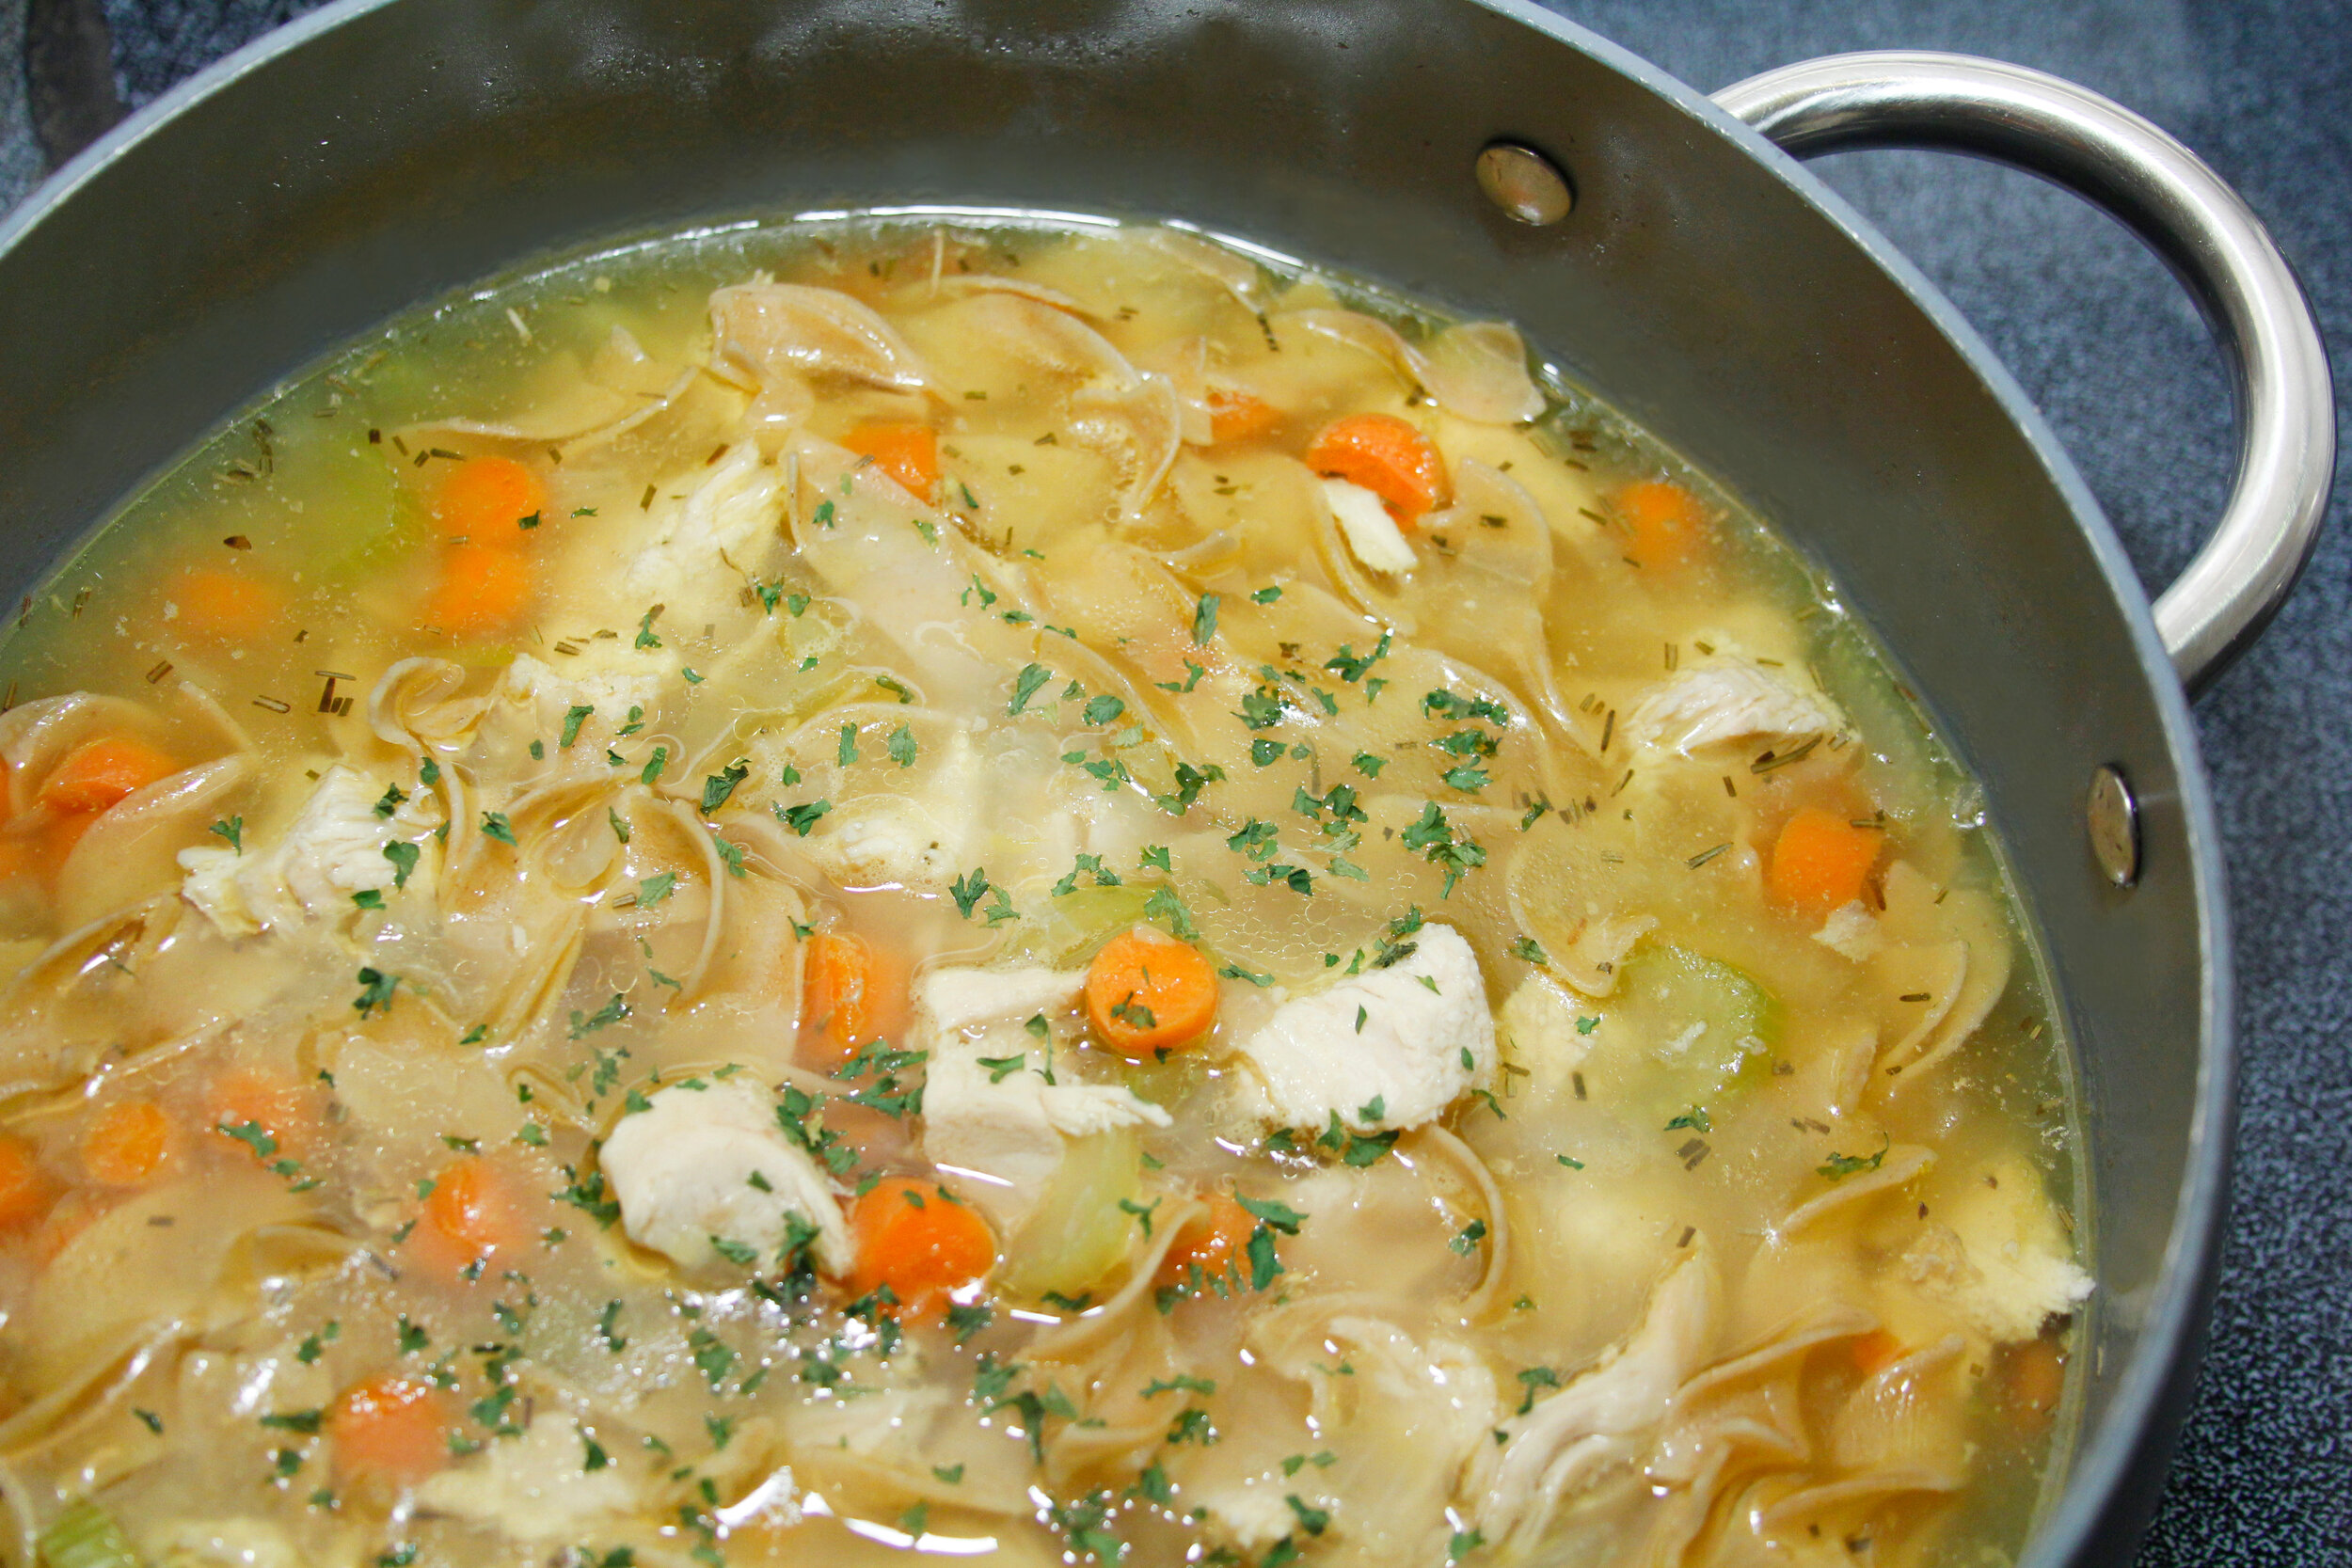 Canva - Large pot of homestyle chicken noodle soup.jpg